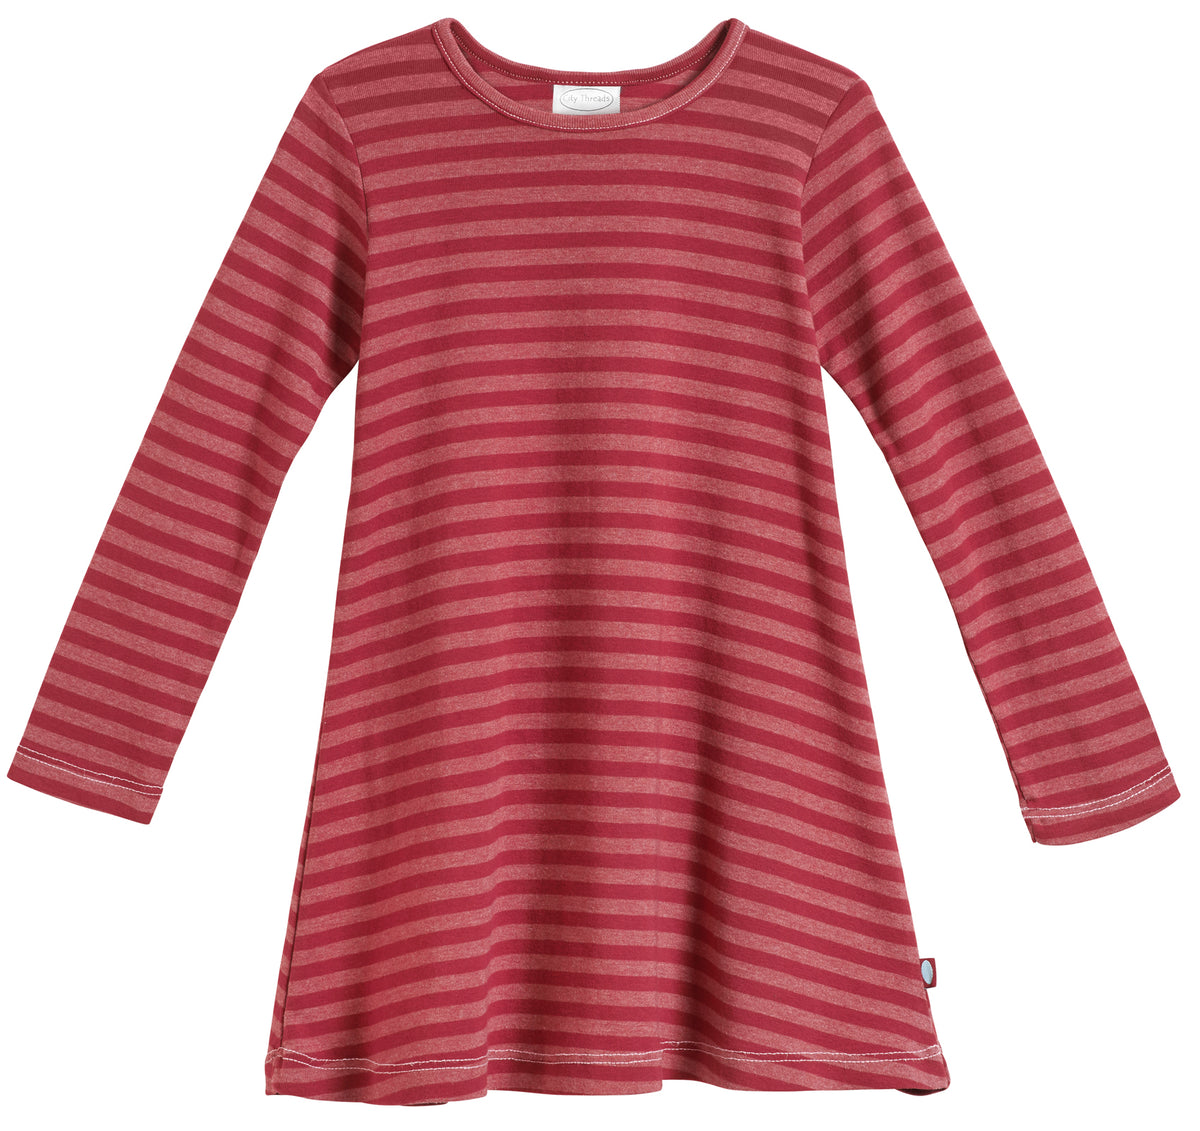 Girls Striped Long Sleeve Dress-Seconds| Damage - Red